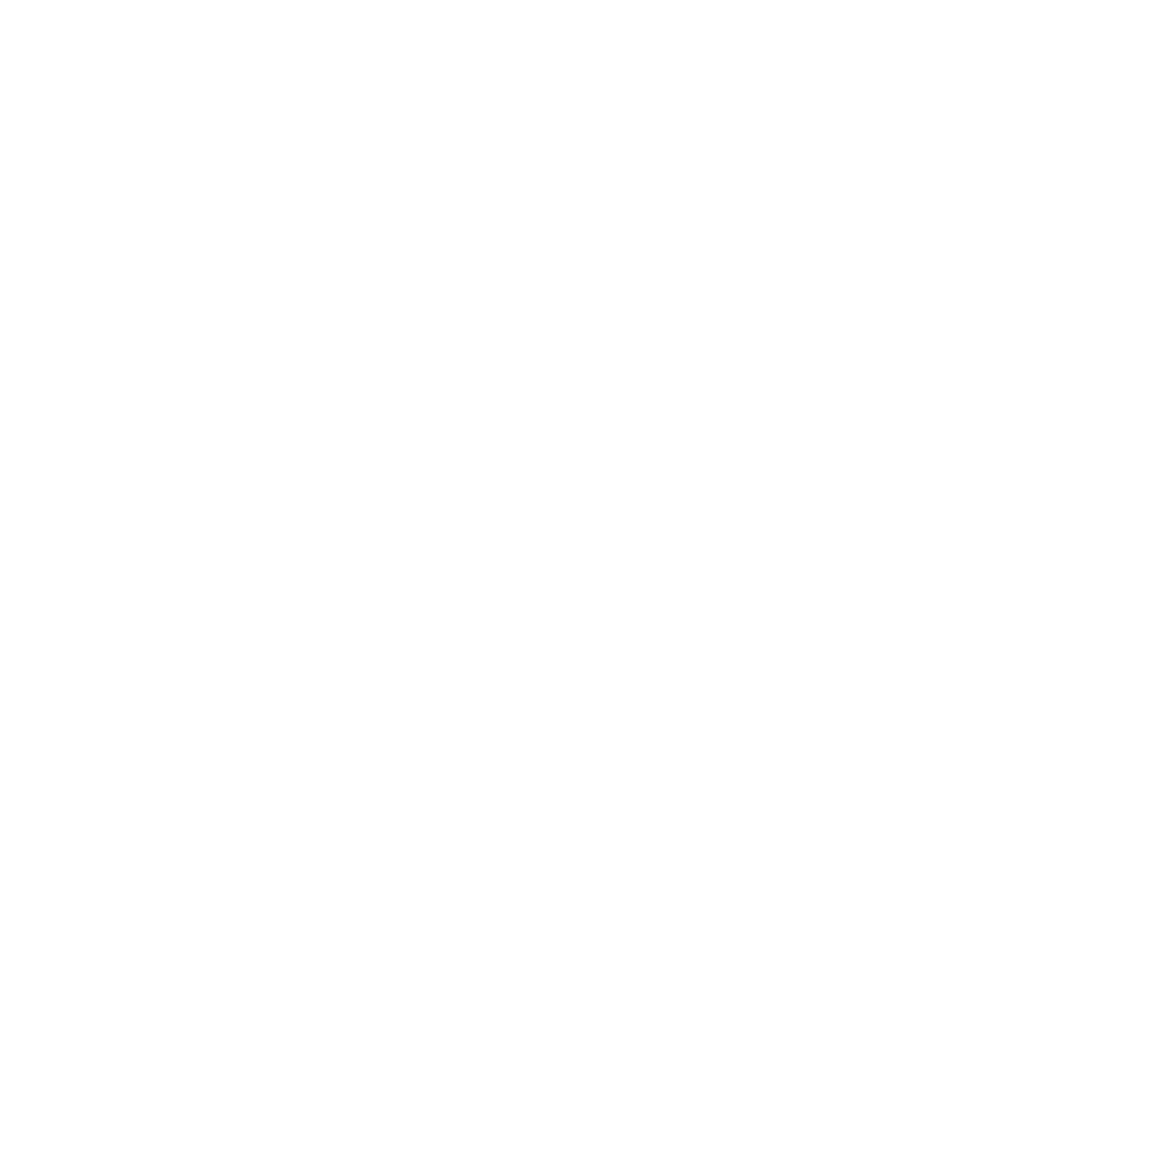 Dapple Breast Pump Cleaning Wipes - 30ct